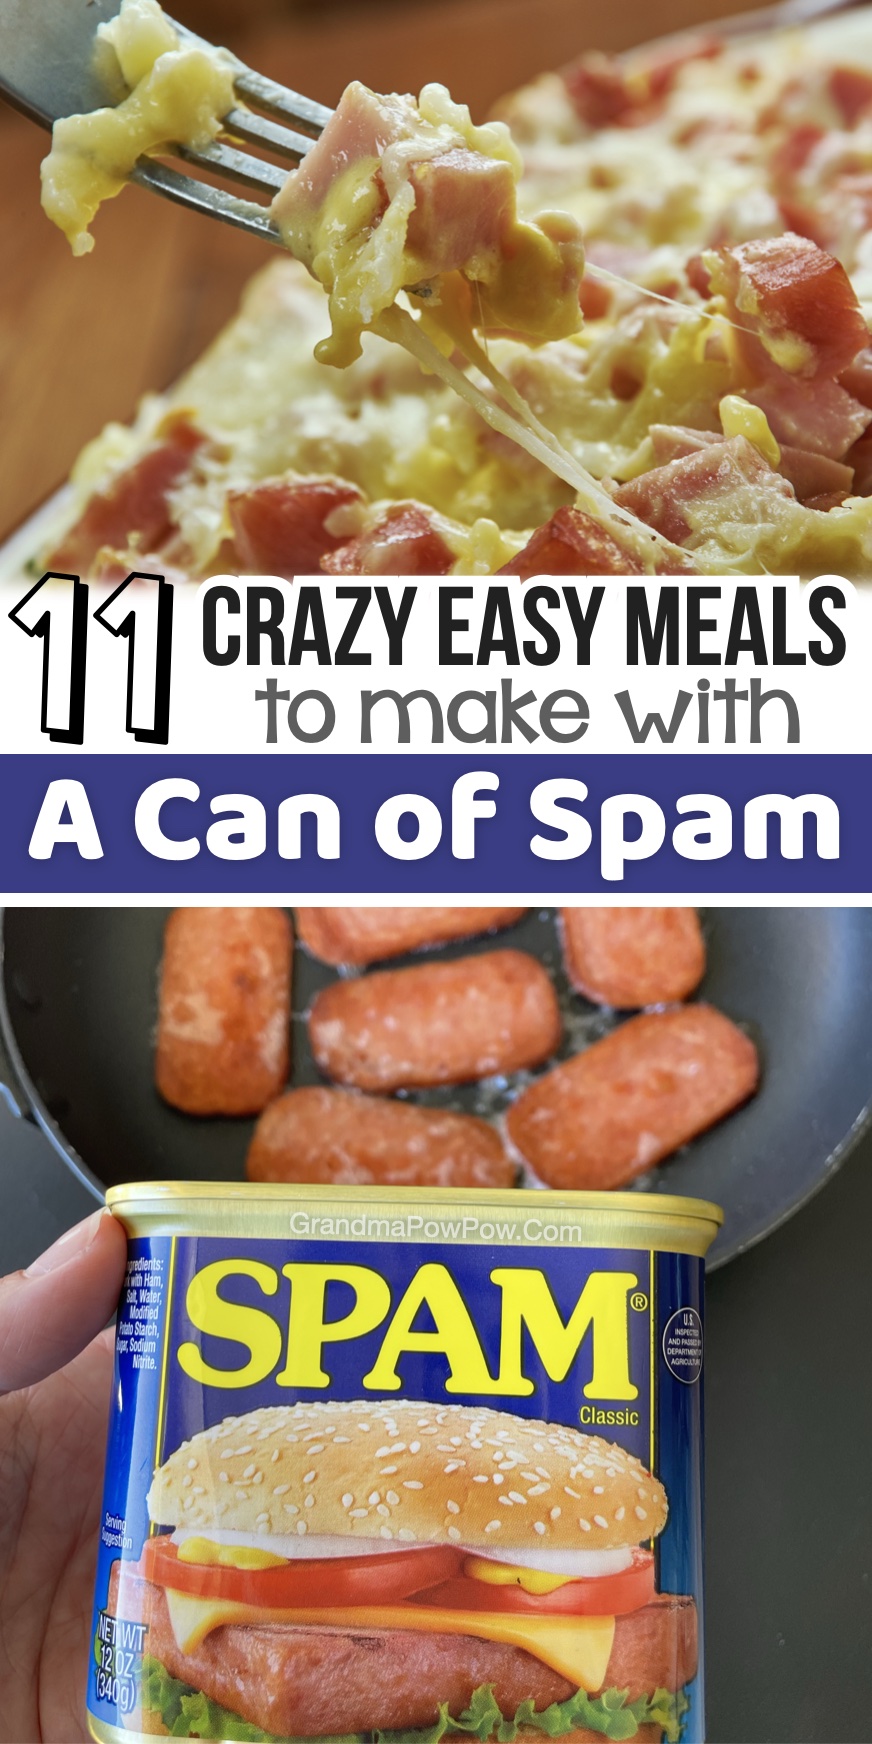 Are you looking for budget meals for your family? You've got to try spam! It tastes just like bacon and taste good in just about everything for breakfast, lunch, or dinner.